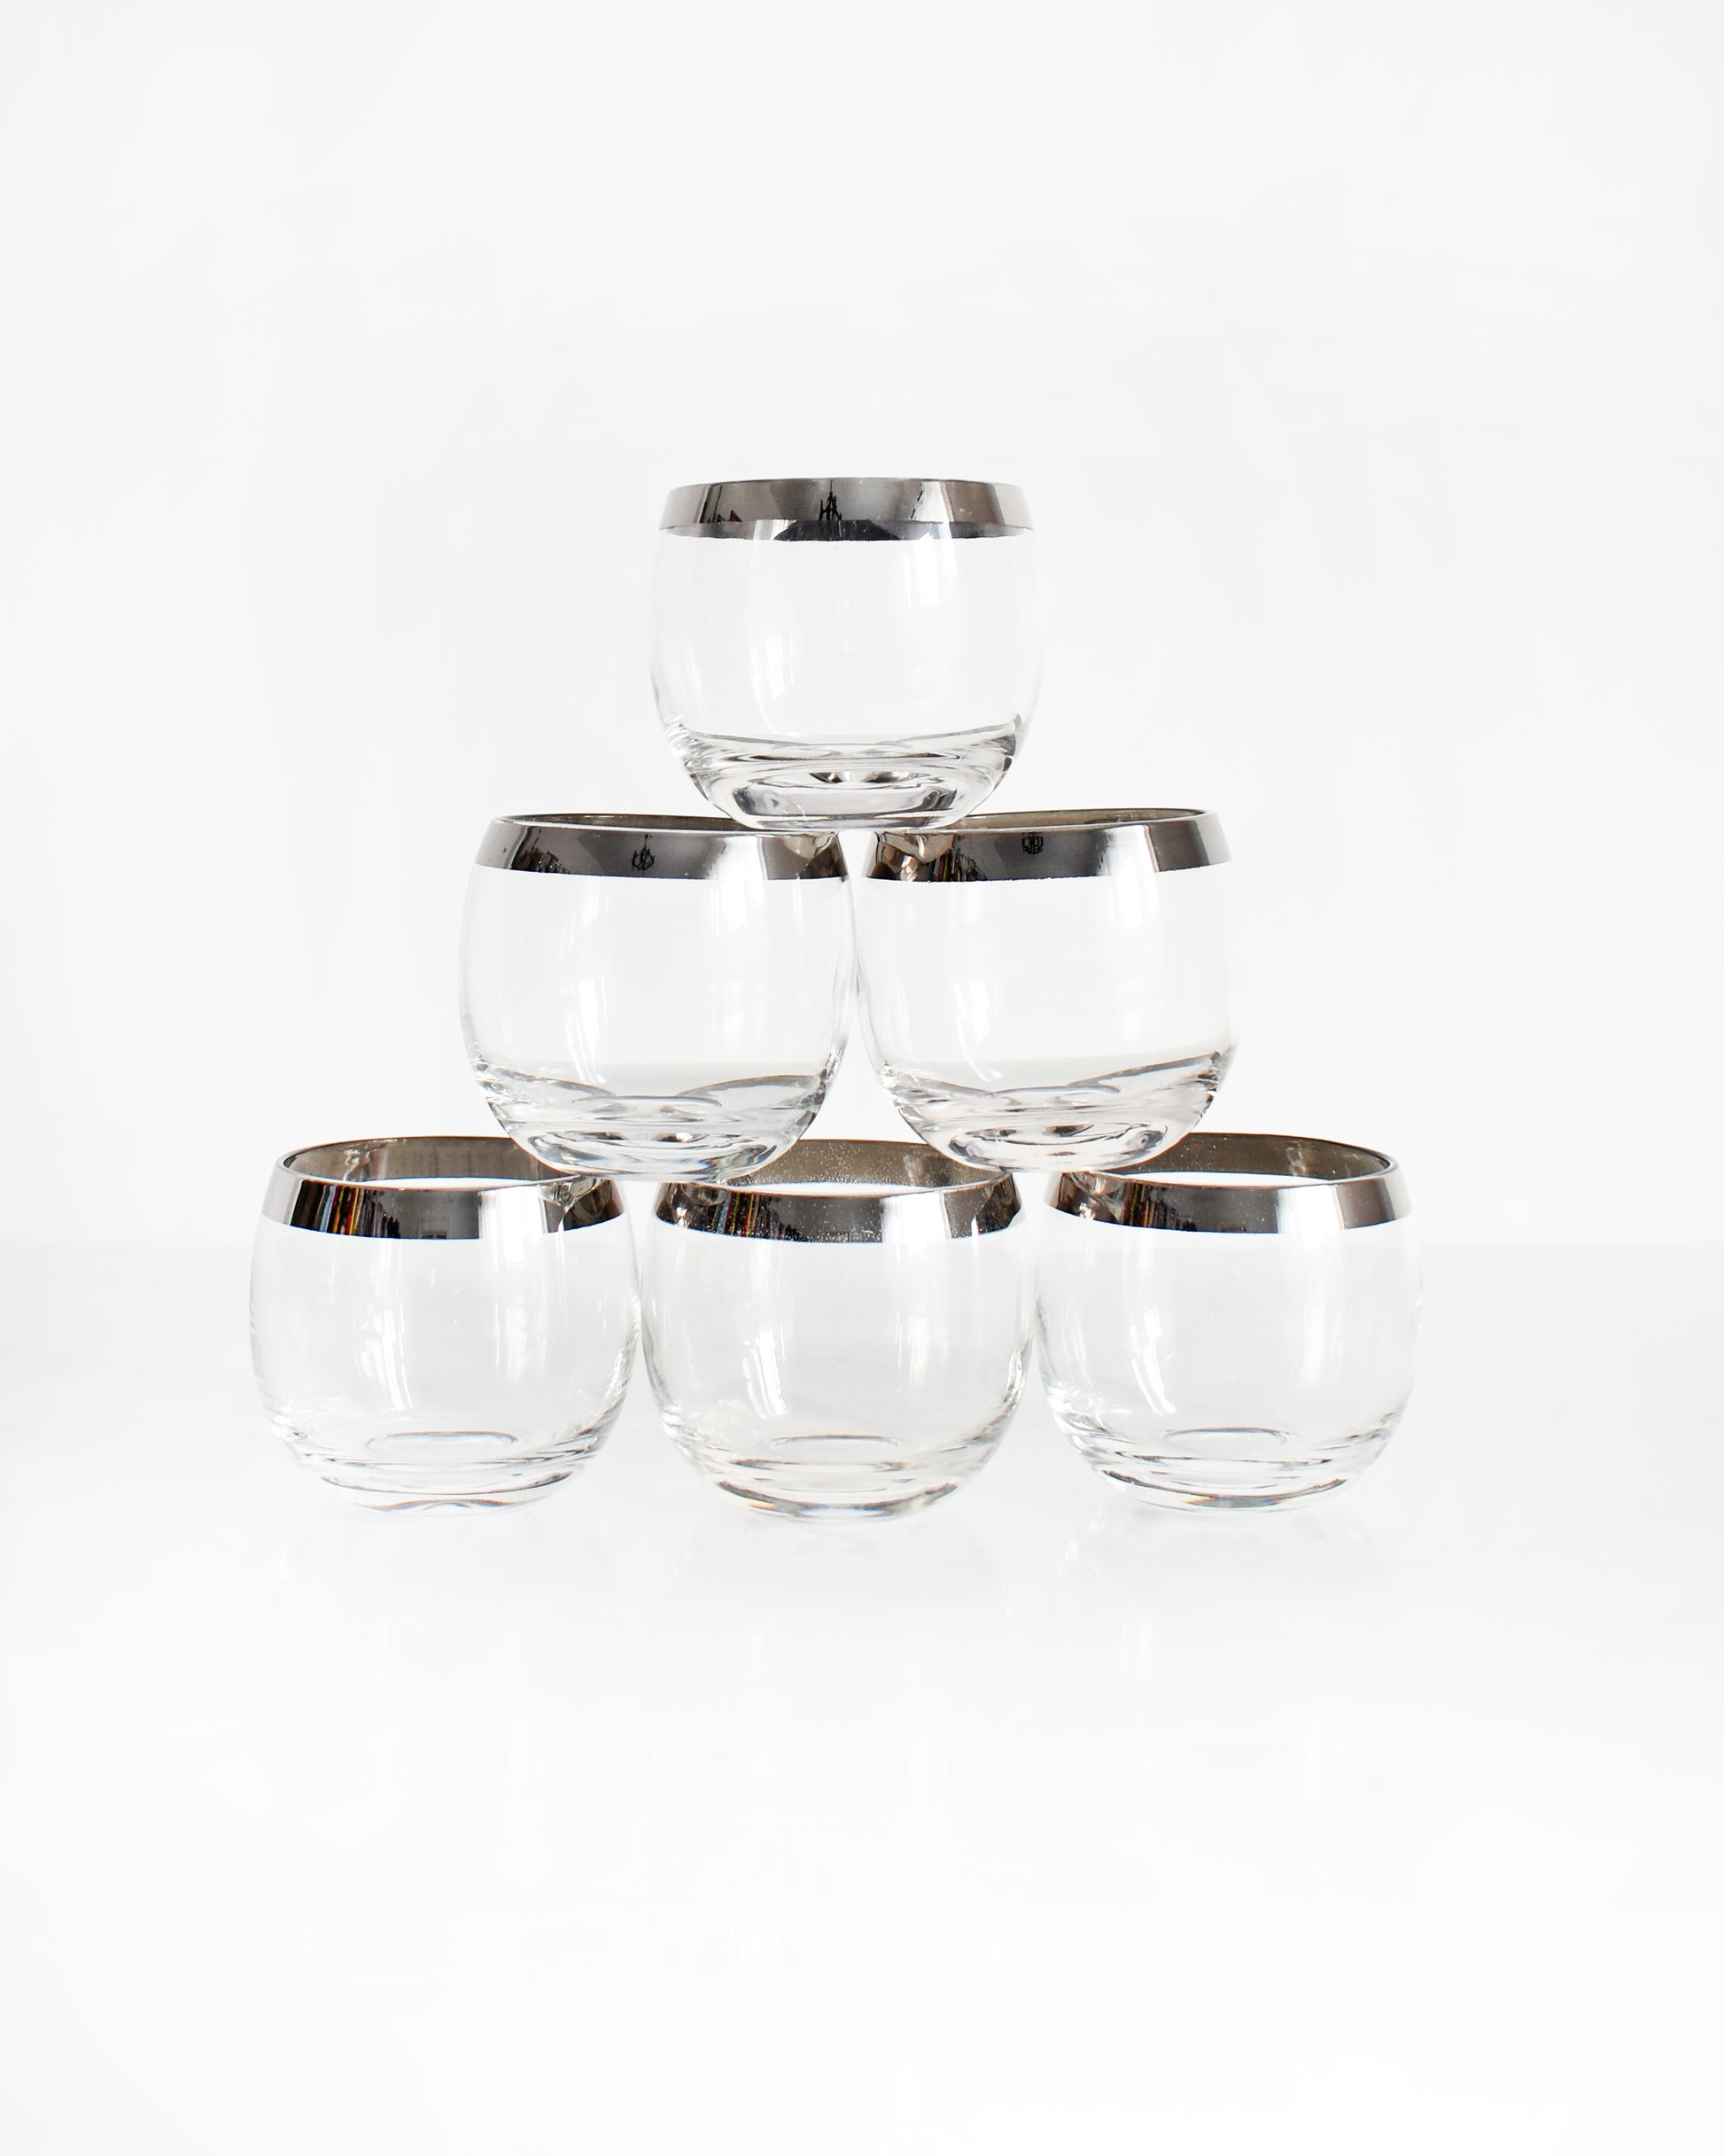 A set of six mid century roly poly glasses with silver rims. The glasses are in a stacked pyramid in this photo.